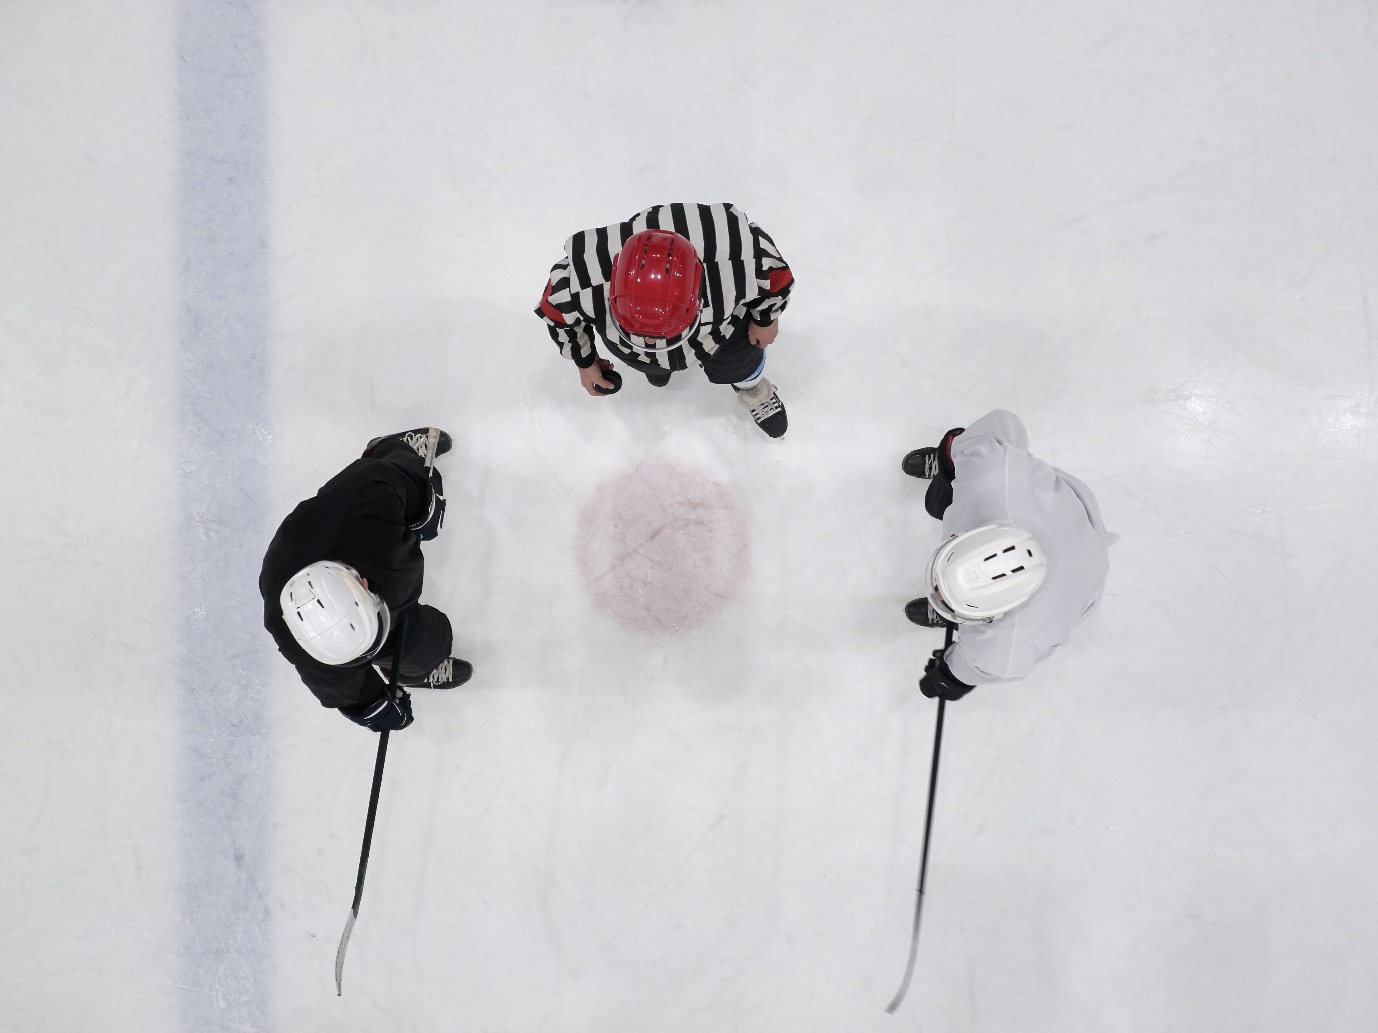 A group of hockey players on ice

Description automatically generated